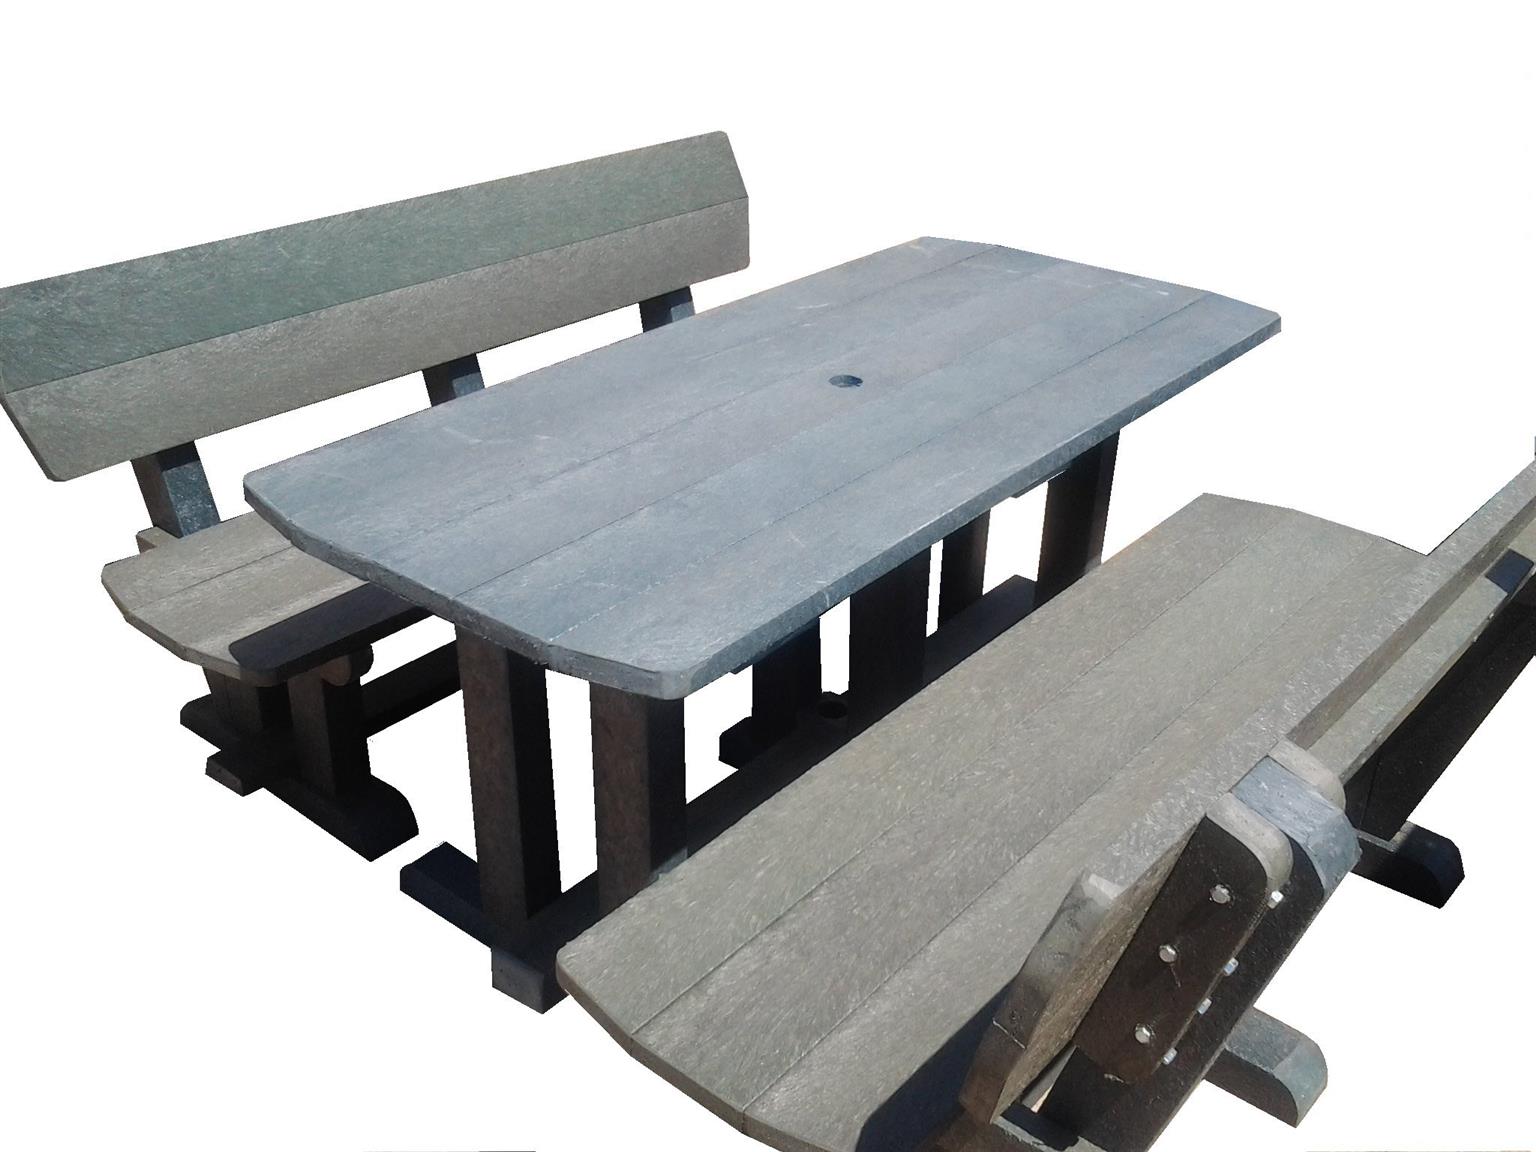  Recycled Plastic Outdoor Furniture